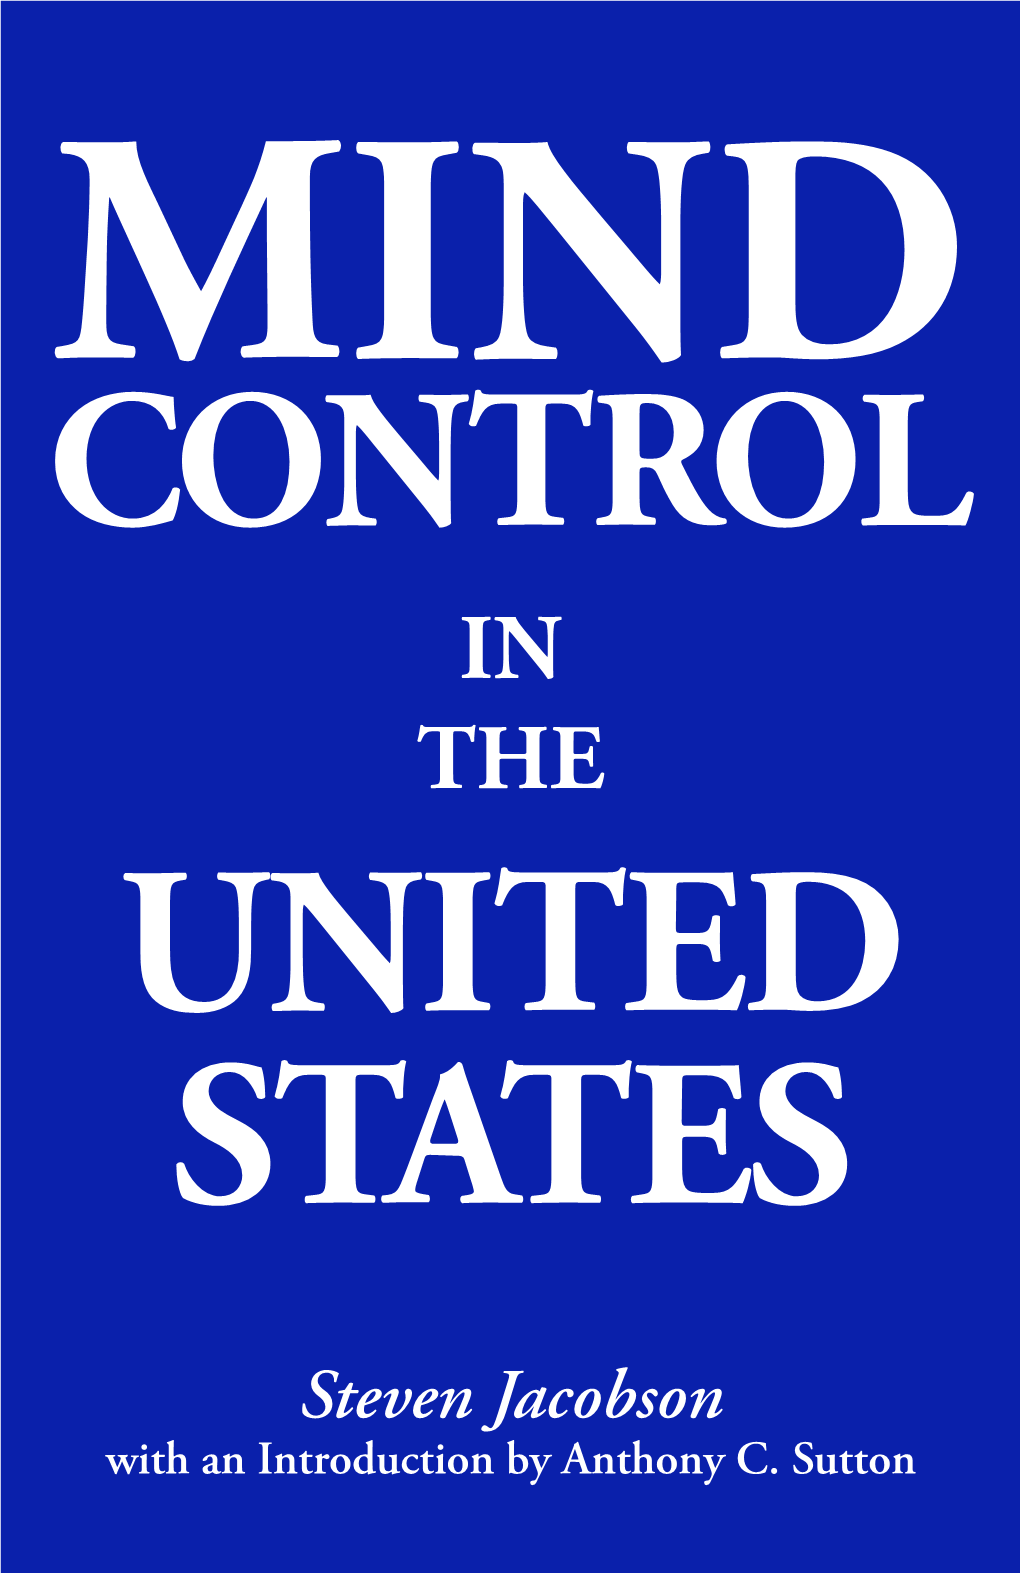 Mind Control in the United States